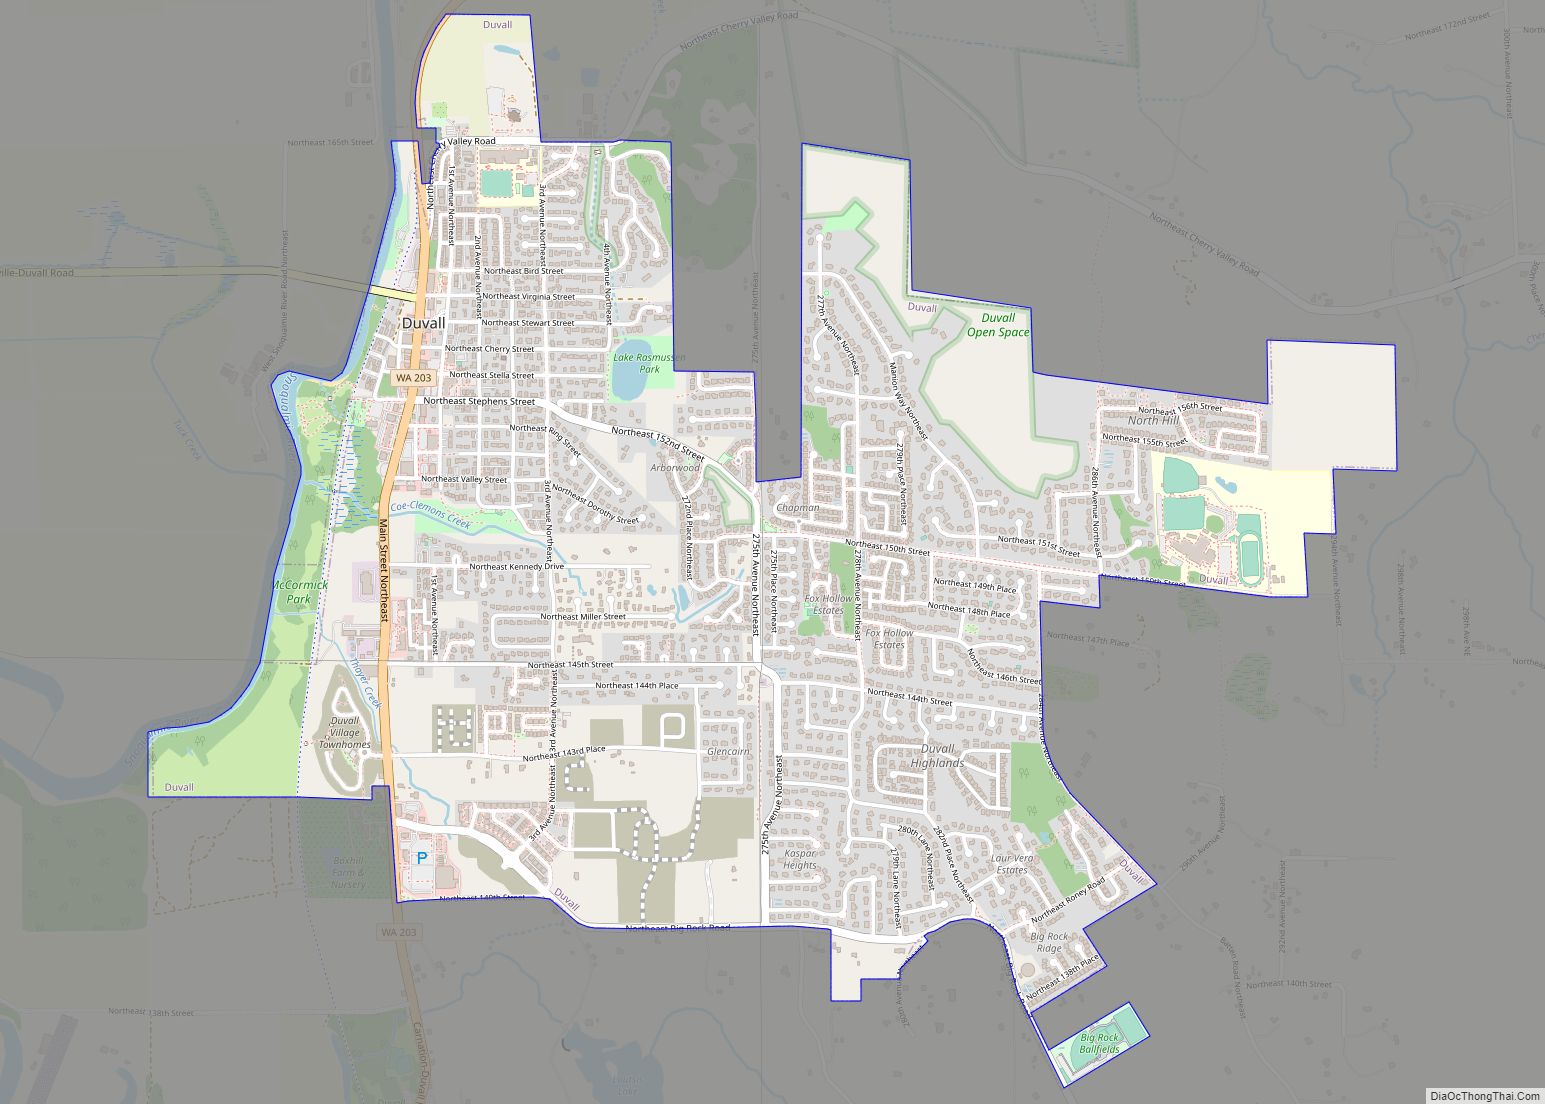 Map of Duvall city